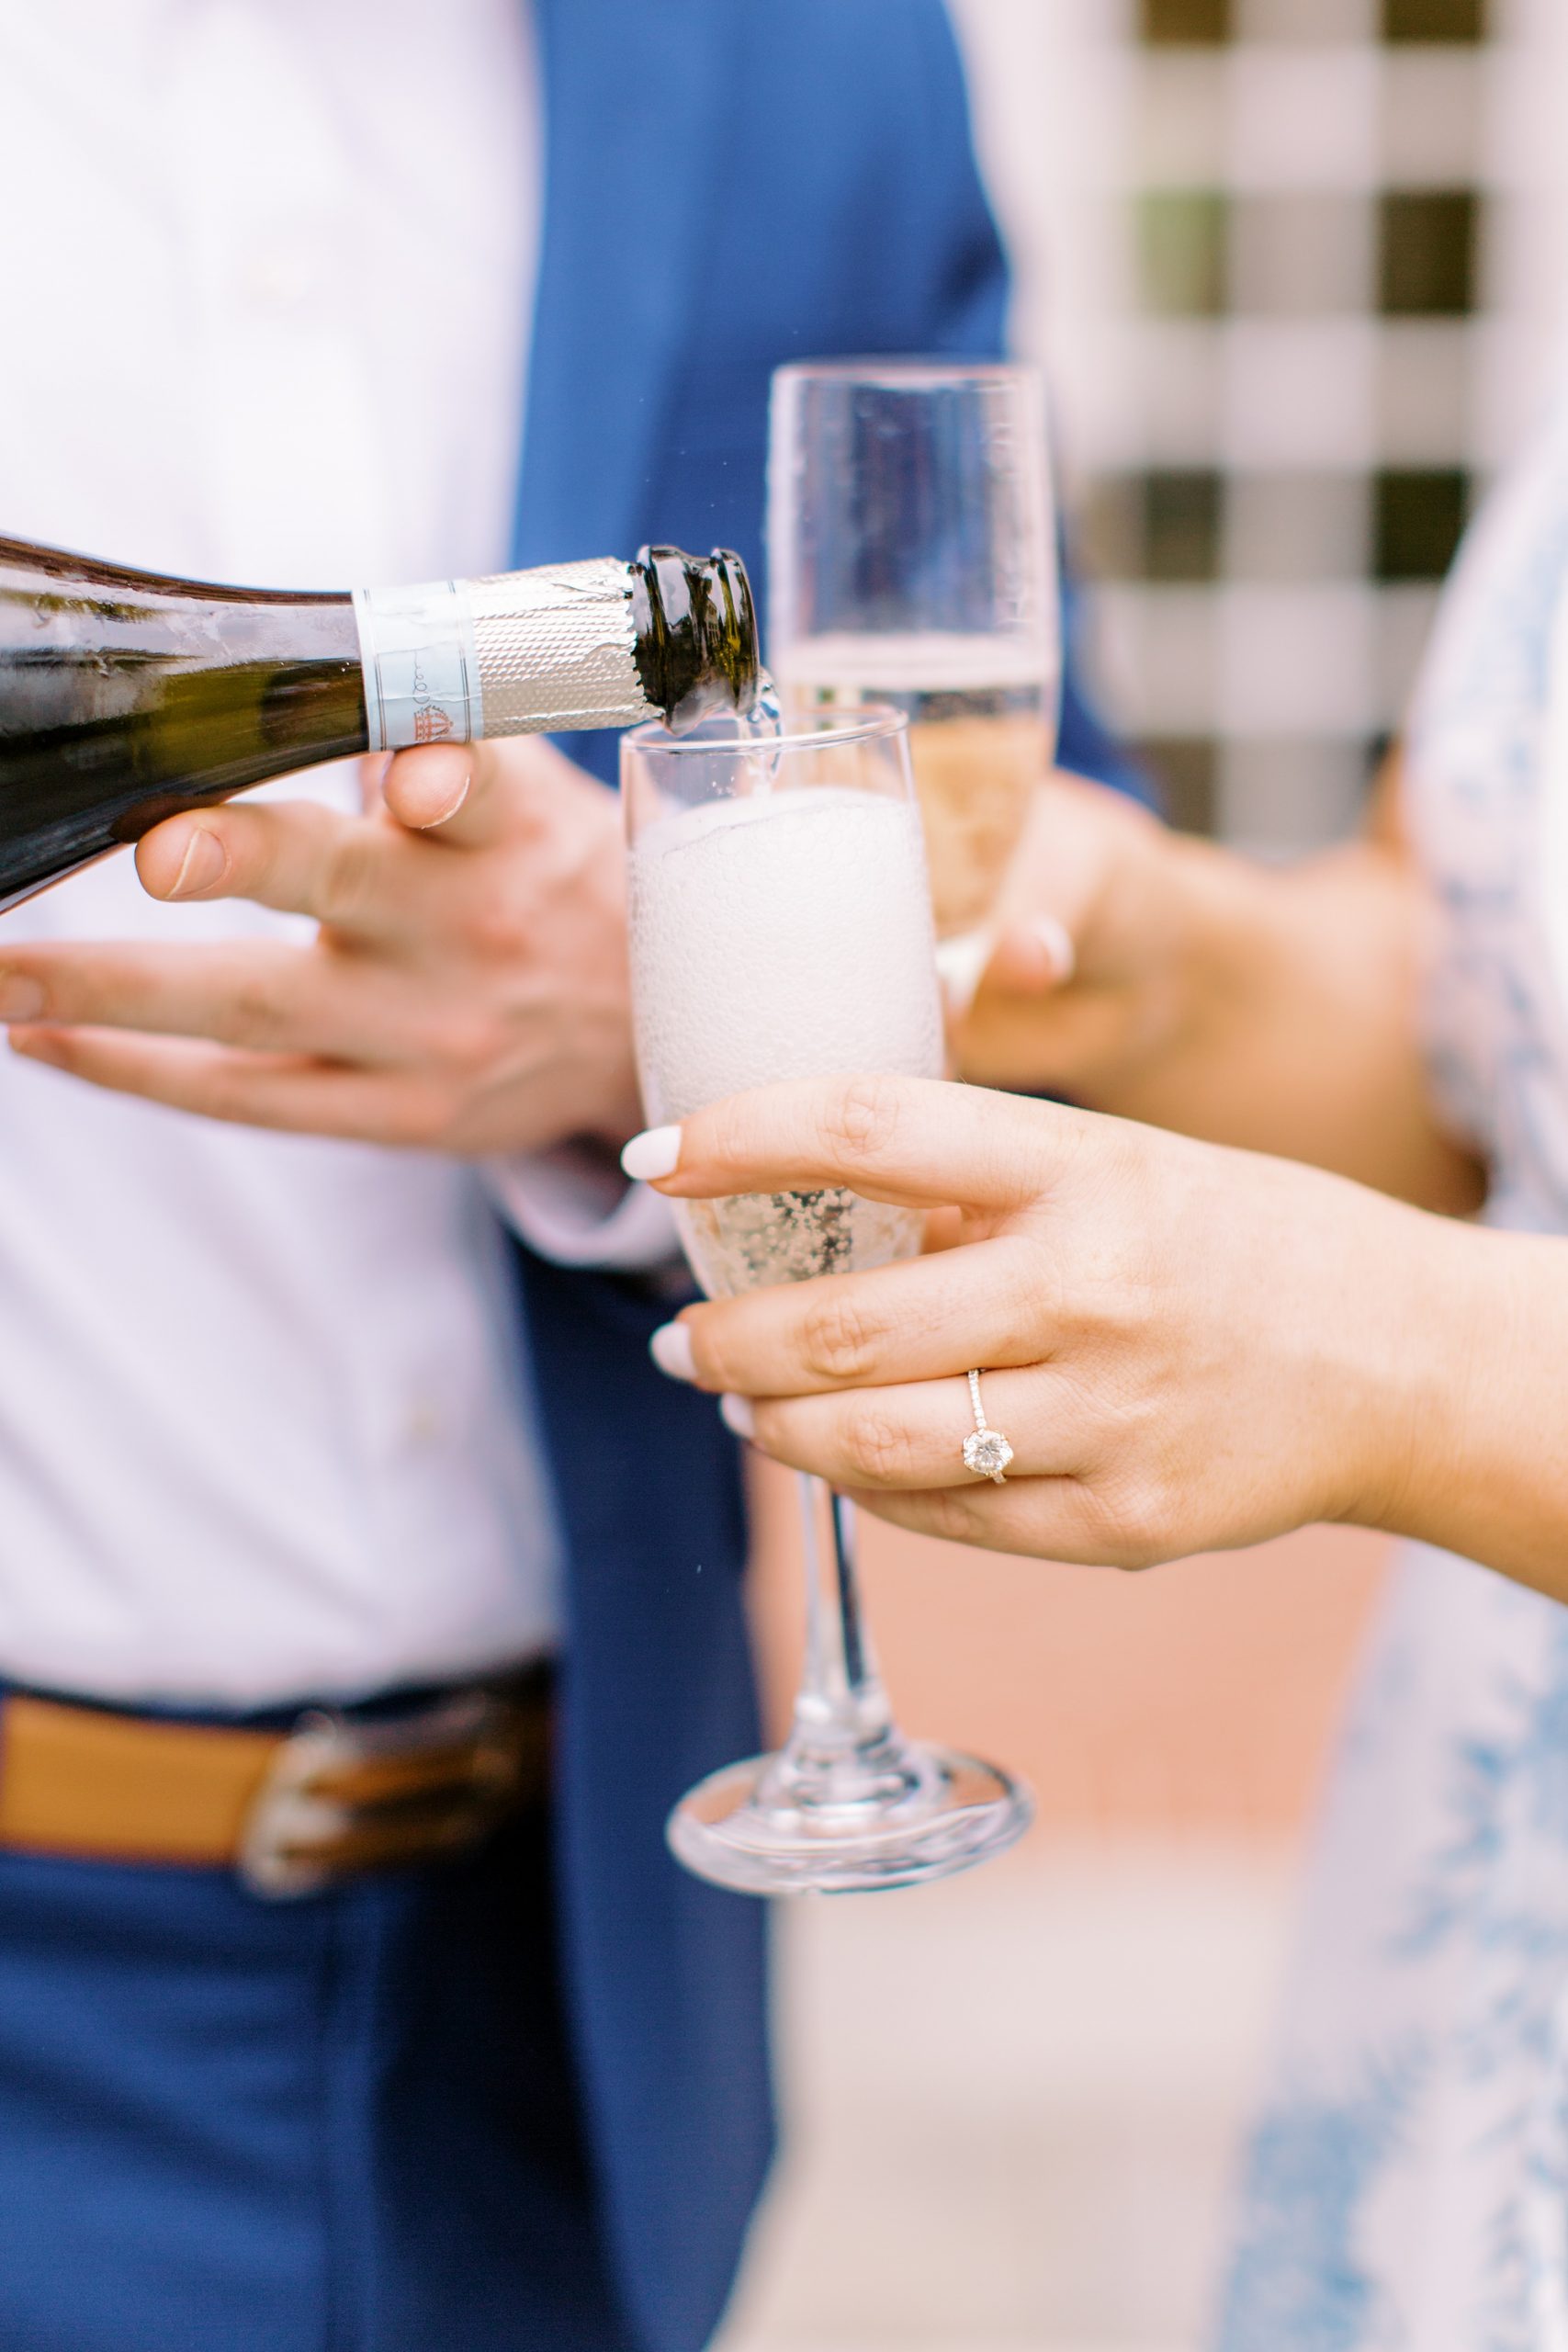 groom pours champagne into glasses for bride-to-be